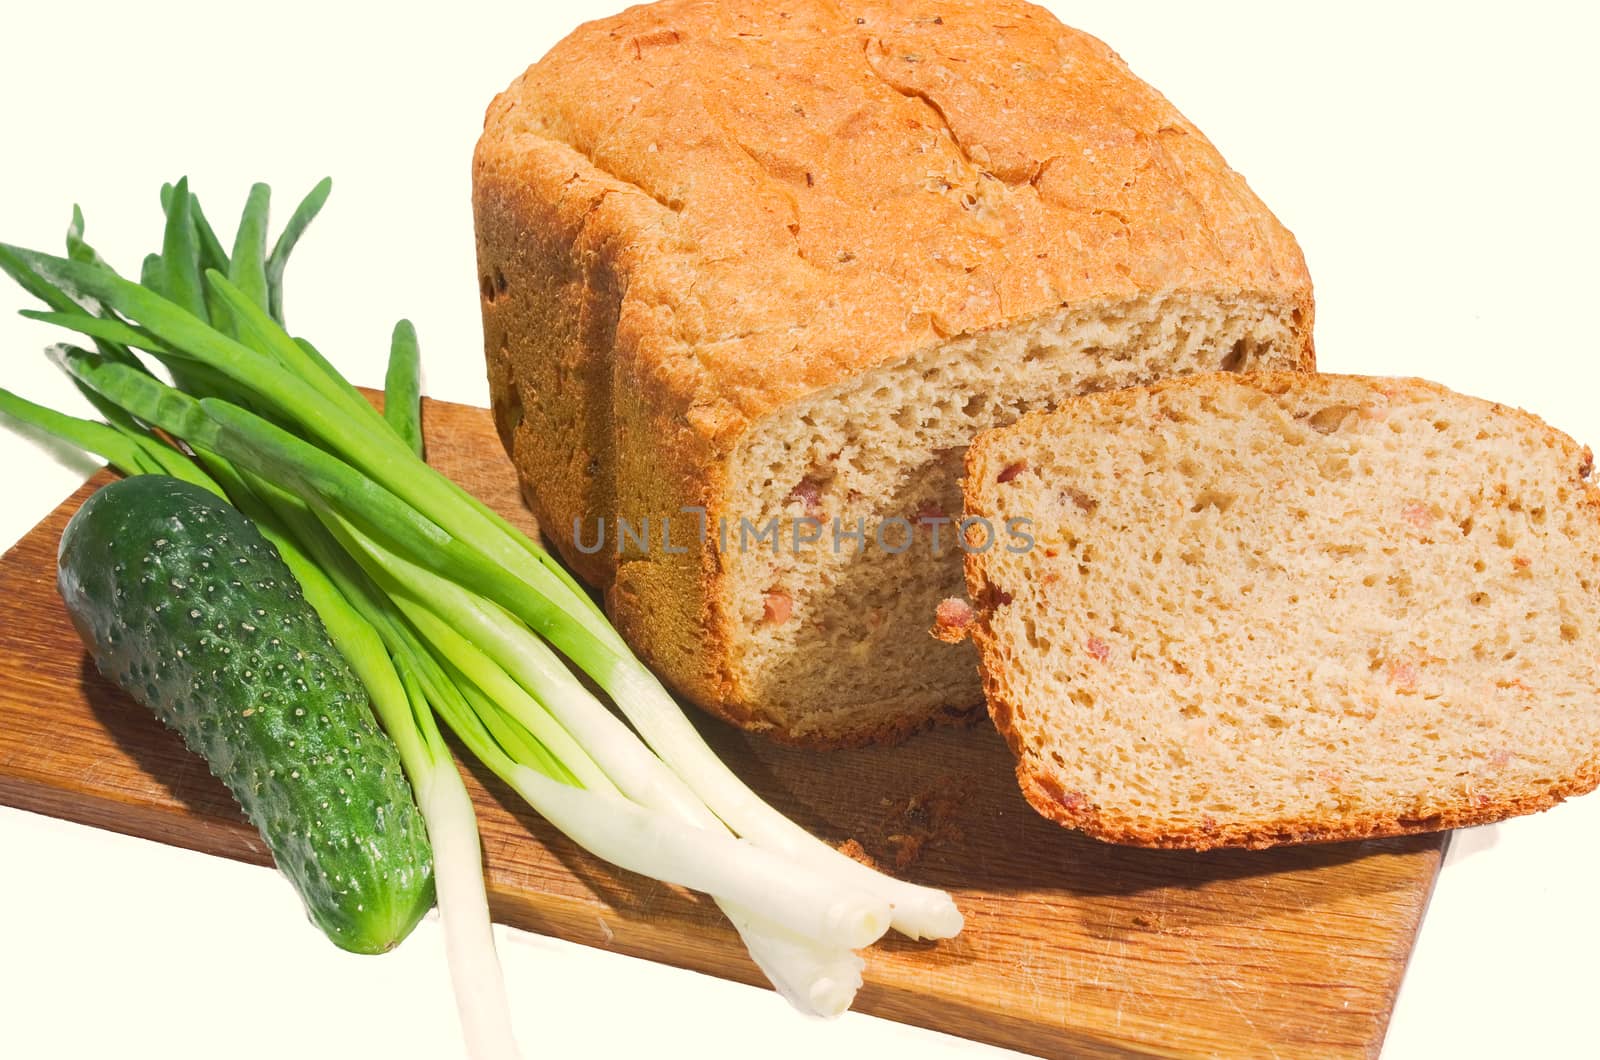 bread and vegetables on a white background by vrvalerian